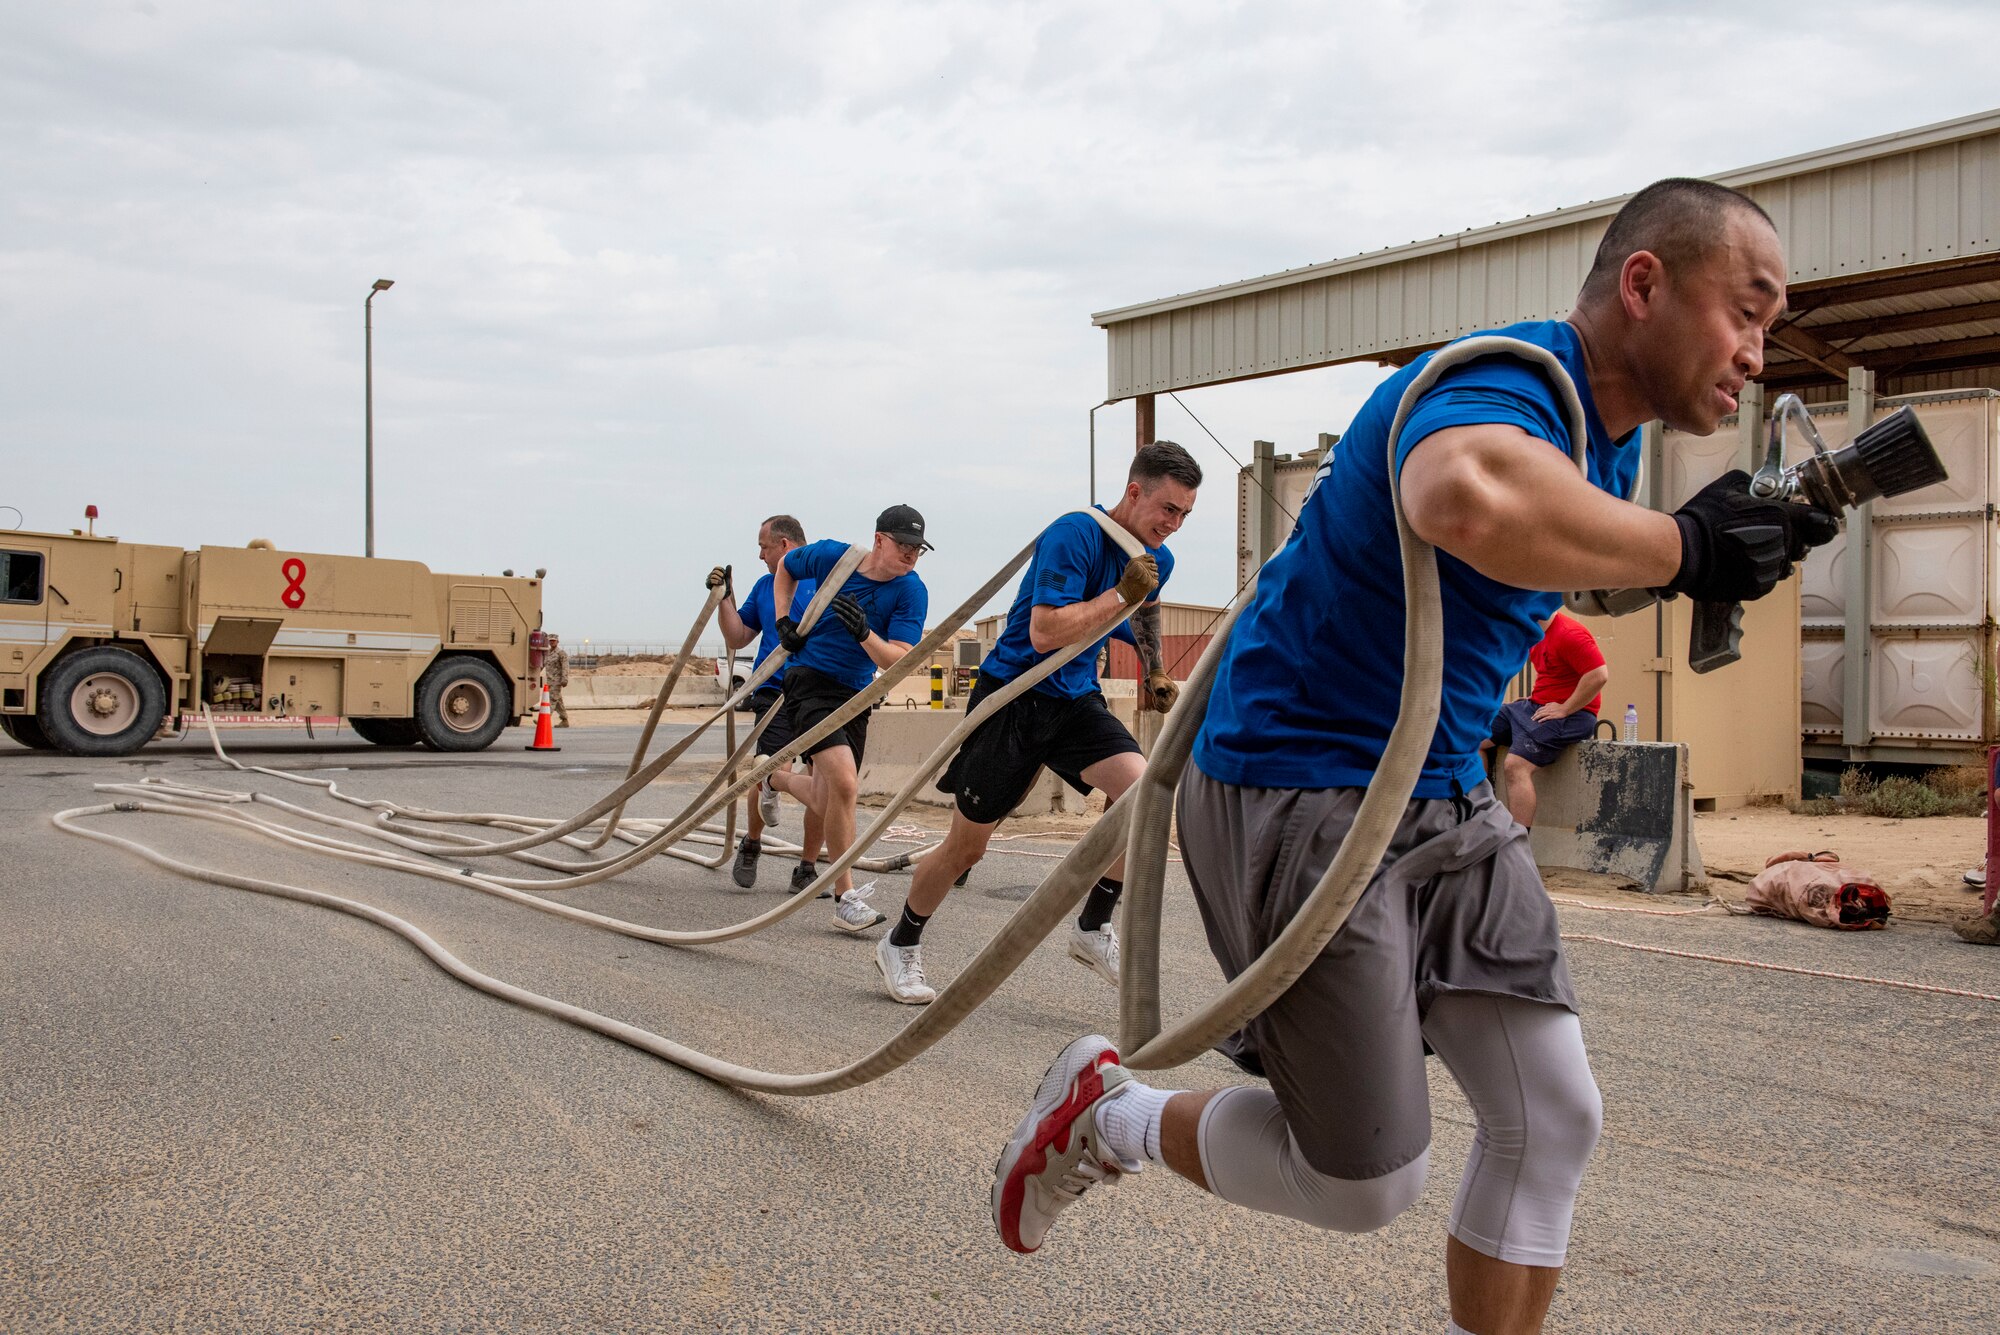 U.S. Air Force Airmen assigned to the 407th Expeditionary Security Forces Squadron run with a hose during the Battle of the Badges event at Ahmed Al Jaber Air Base, Kuwait, Nov. 11, 2020.